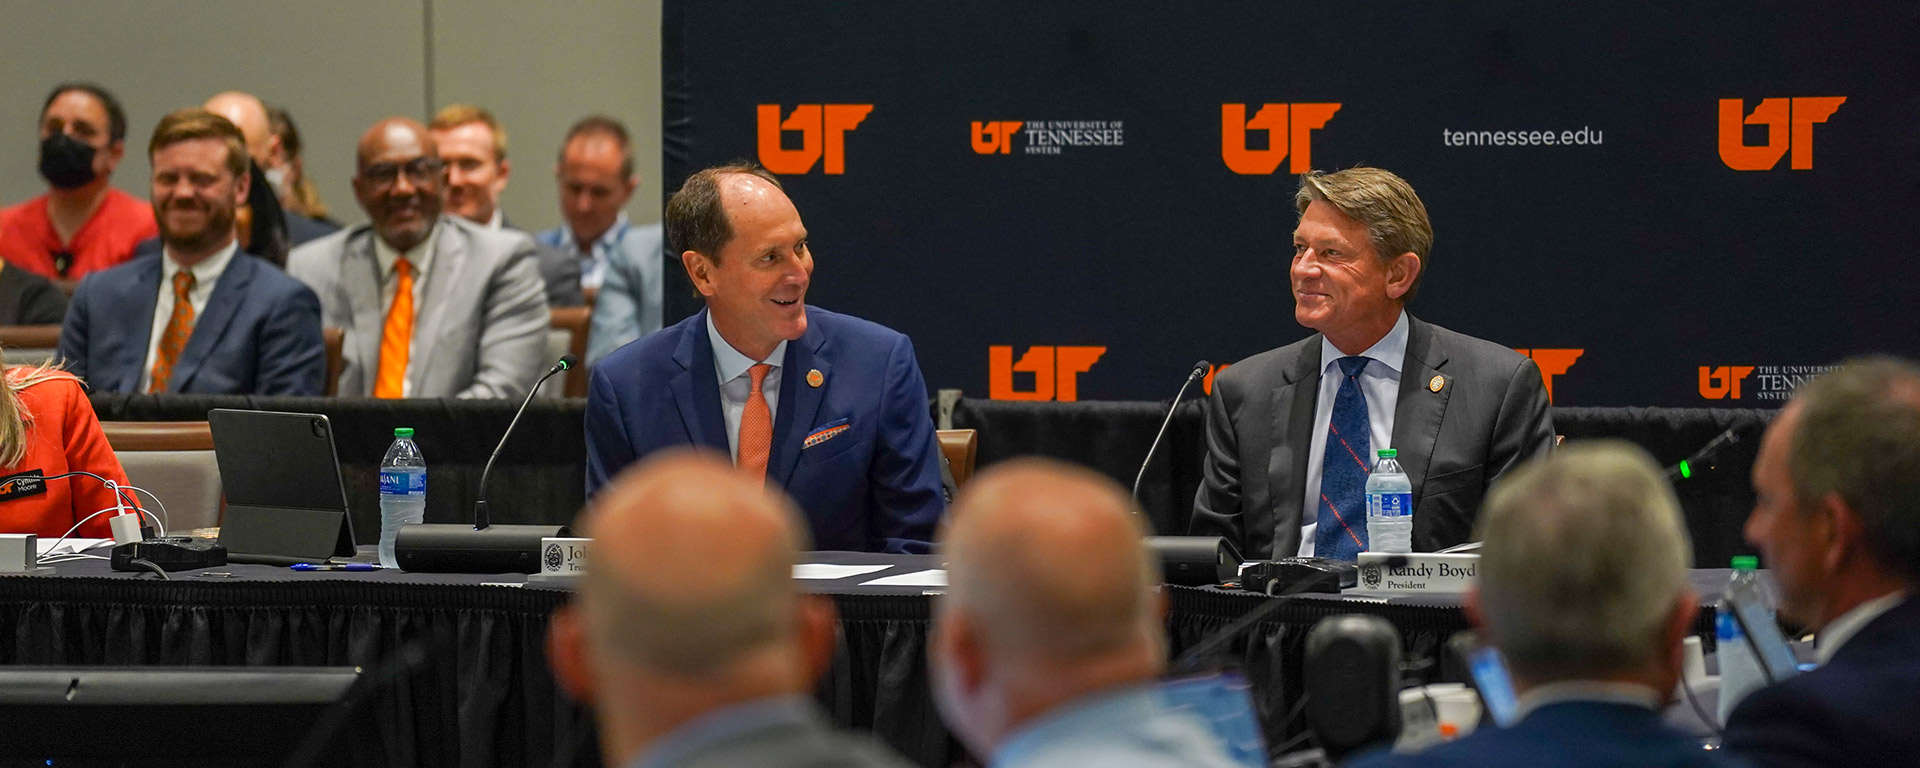 UT Board of Trustees Chairman John Compton and UT President Randy Boyd during the annual meeting. Photo By Sam Thomas